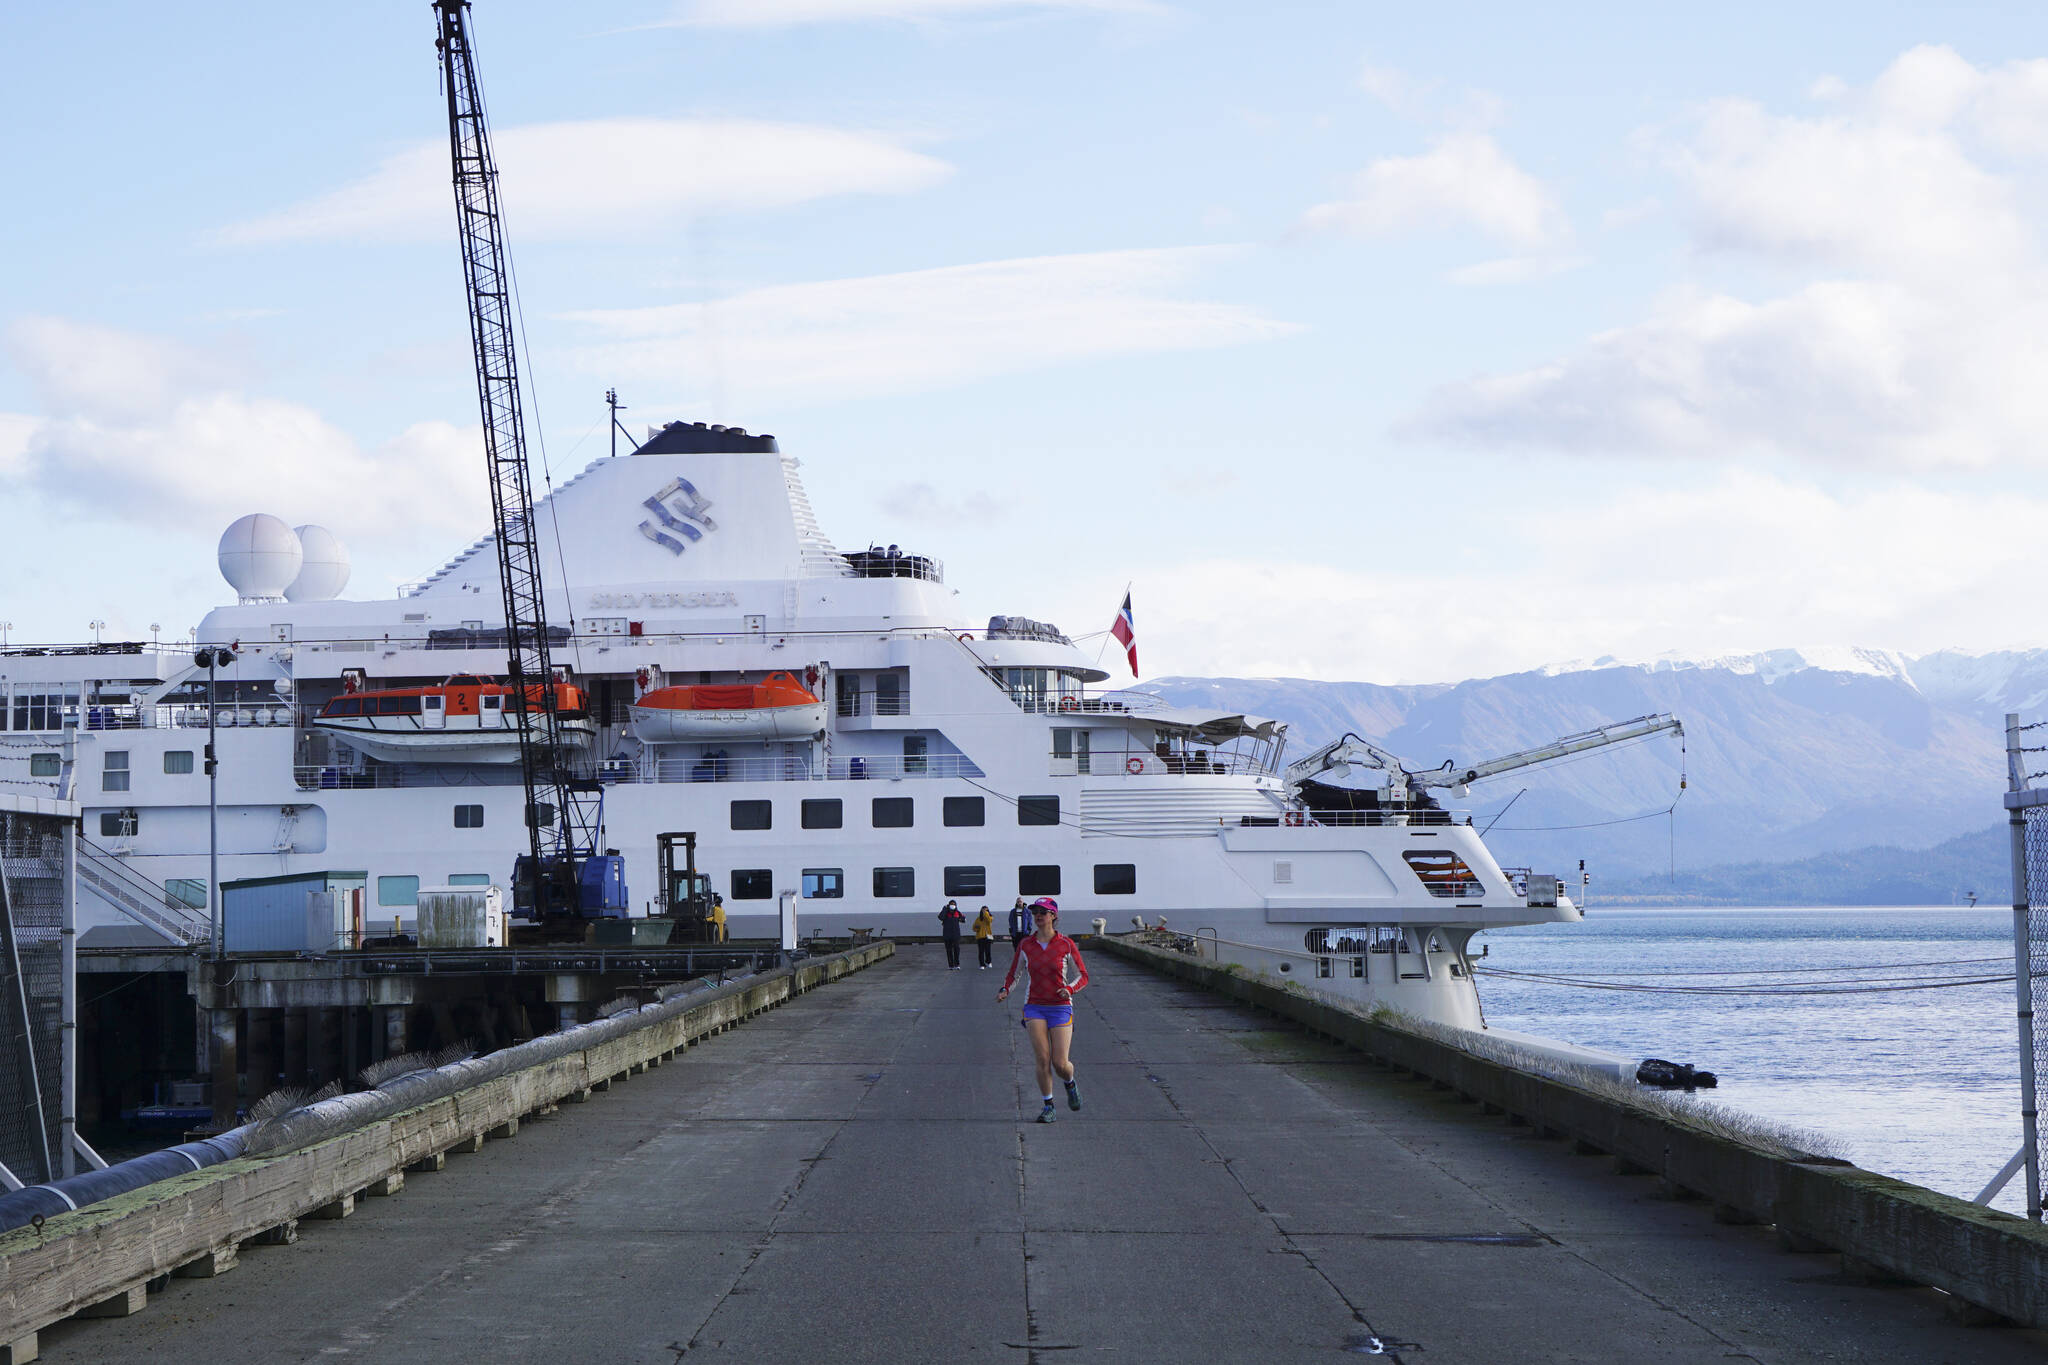 A jogger leaves the Silversea cruise ship Silver Wind at the Deep Water Dock on Sunday, Sept. 25, 2022, in Homer, Alaska. (Photo by Michael Armstrong/Homer News)